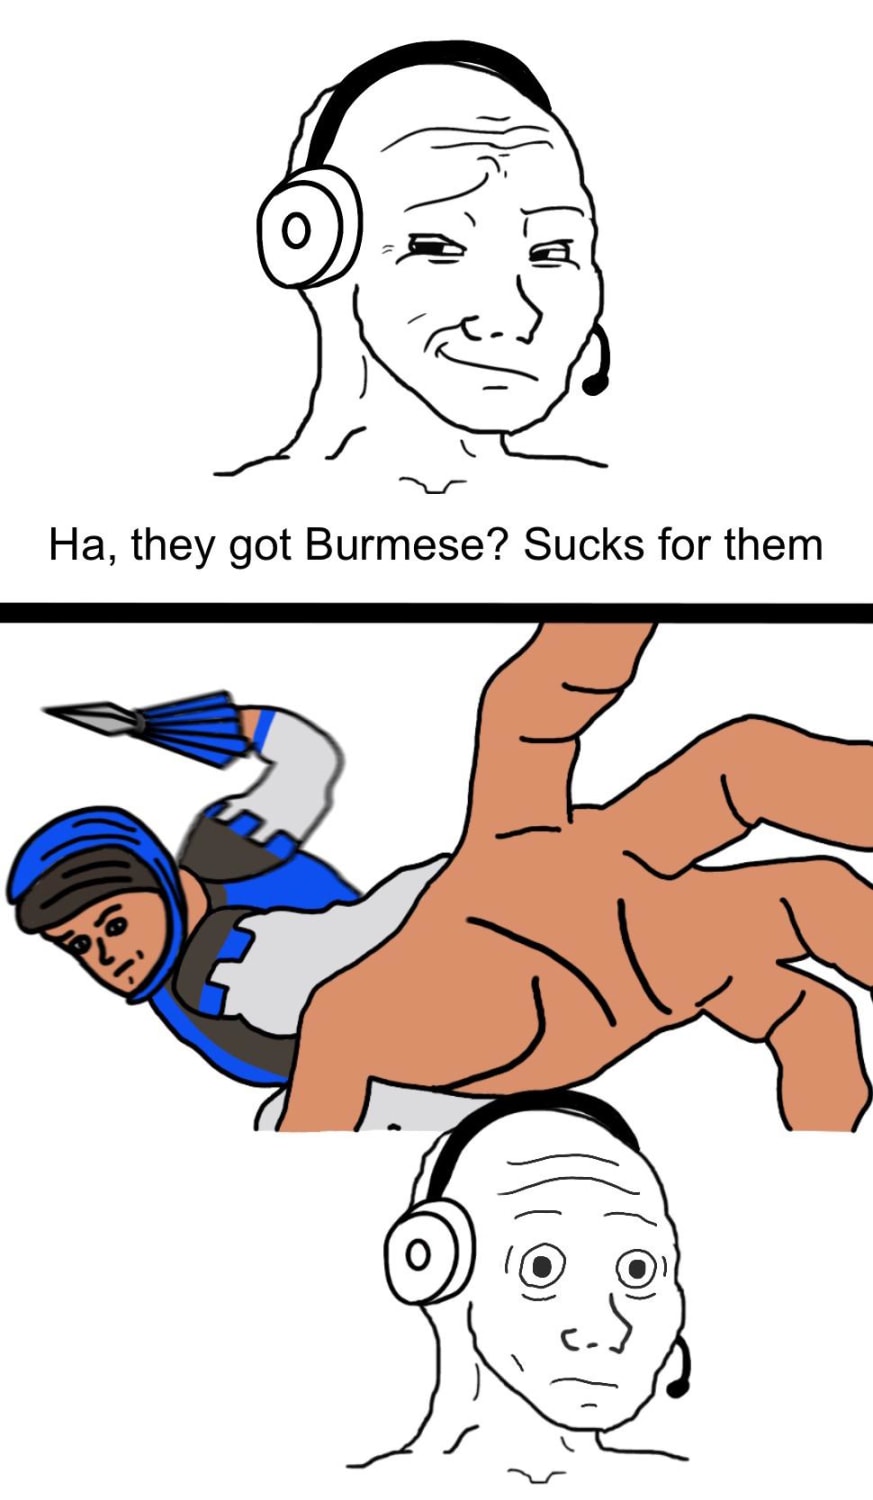 For the few Burmese mains out there